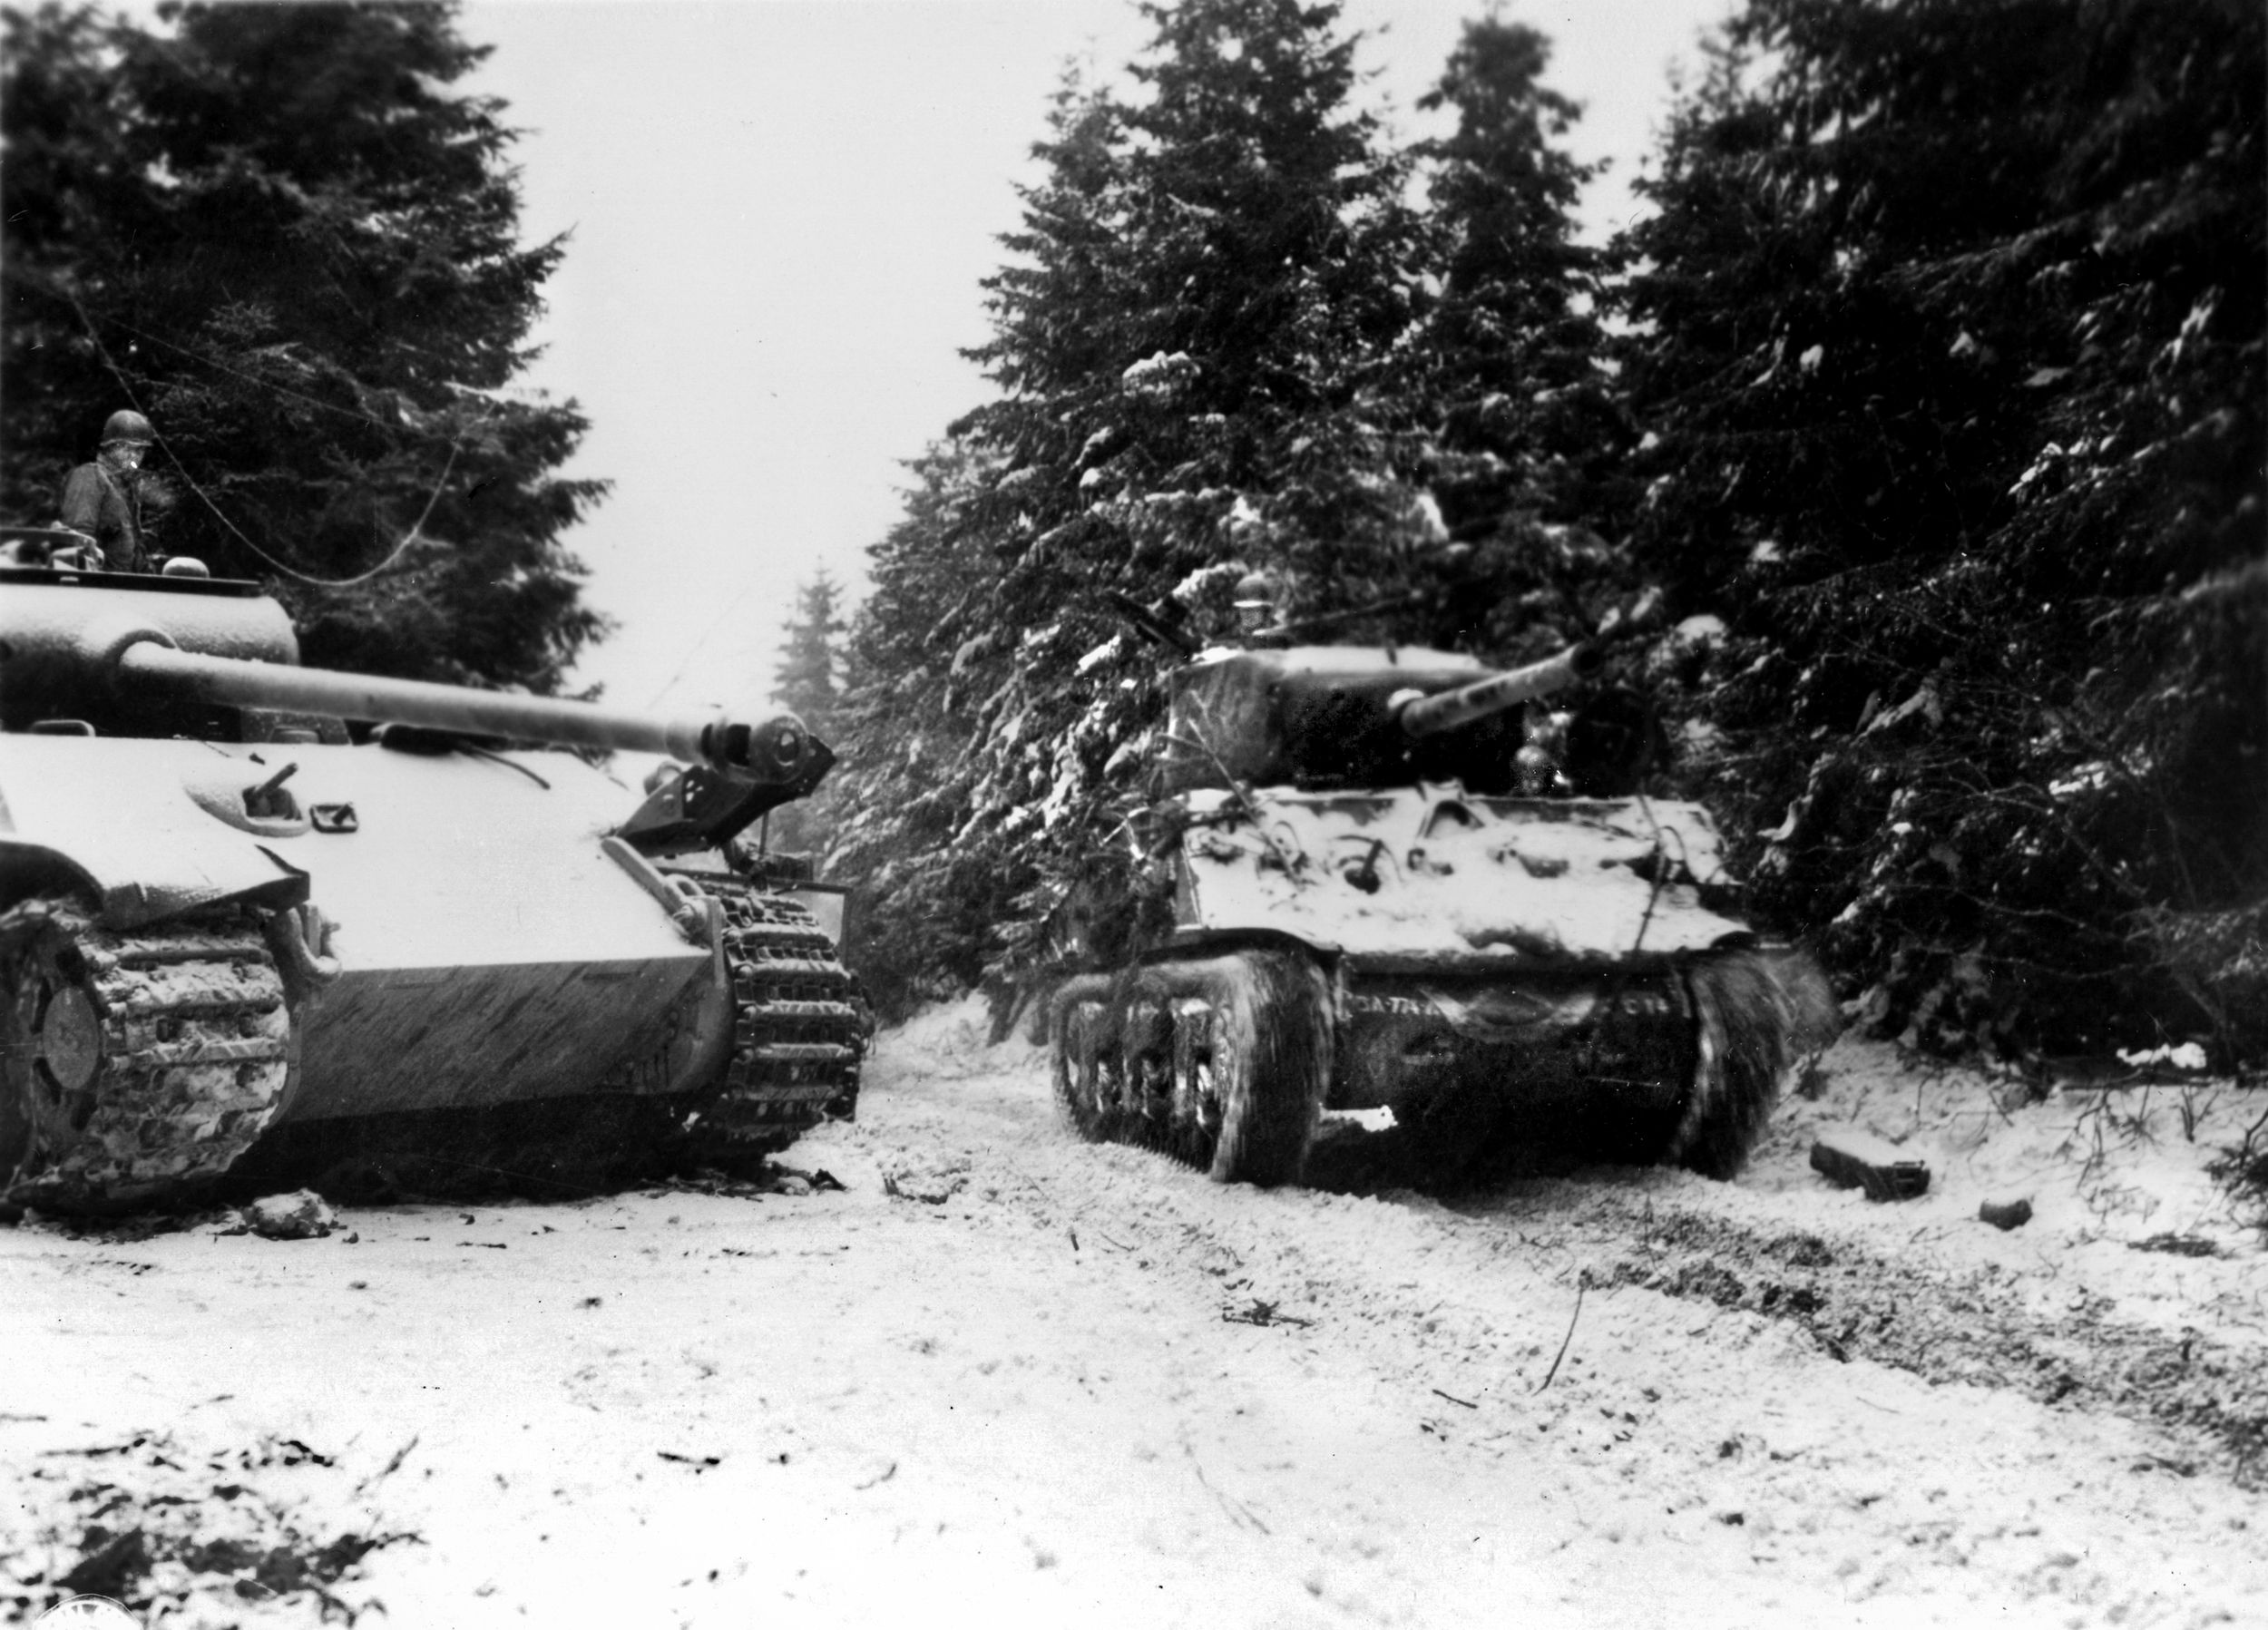 A 3rd Armored Division Sherman (right) passes a knocked-out Pz.Kpfw V “Panther” tank on a snowy Belgian forest road during the Battle of the Bulge, December 1944. A curious GI can be seen examining the enemy tank.